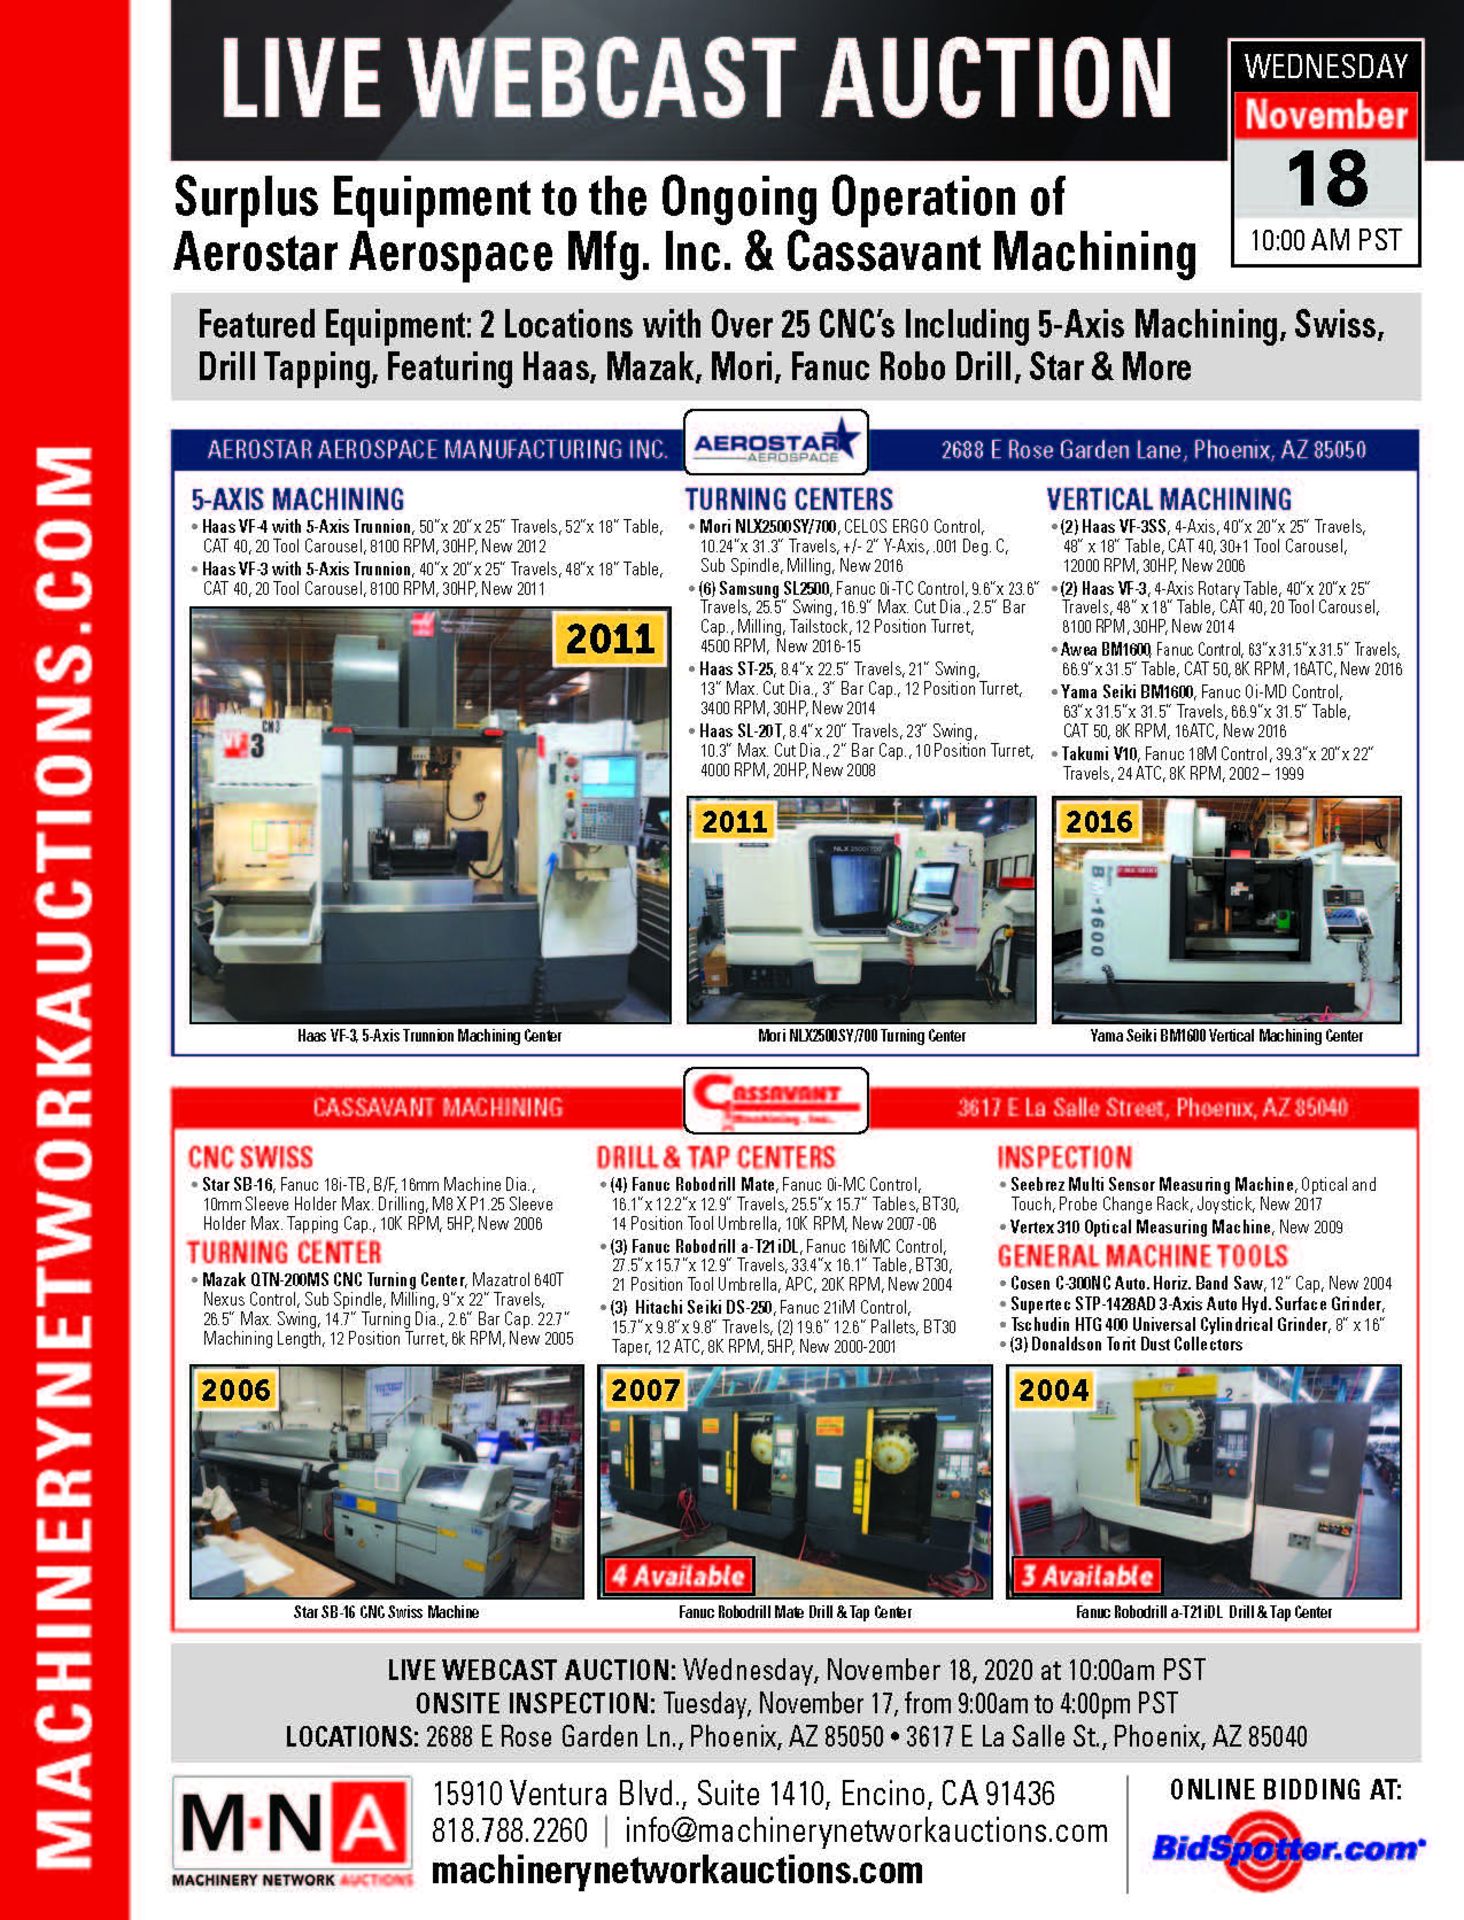 2 Locations with Over 25 CNC’s Including Haas 5-Axis Machining, Fanuc Robodrills, Star Swiss & More